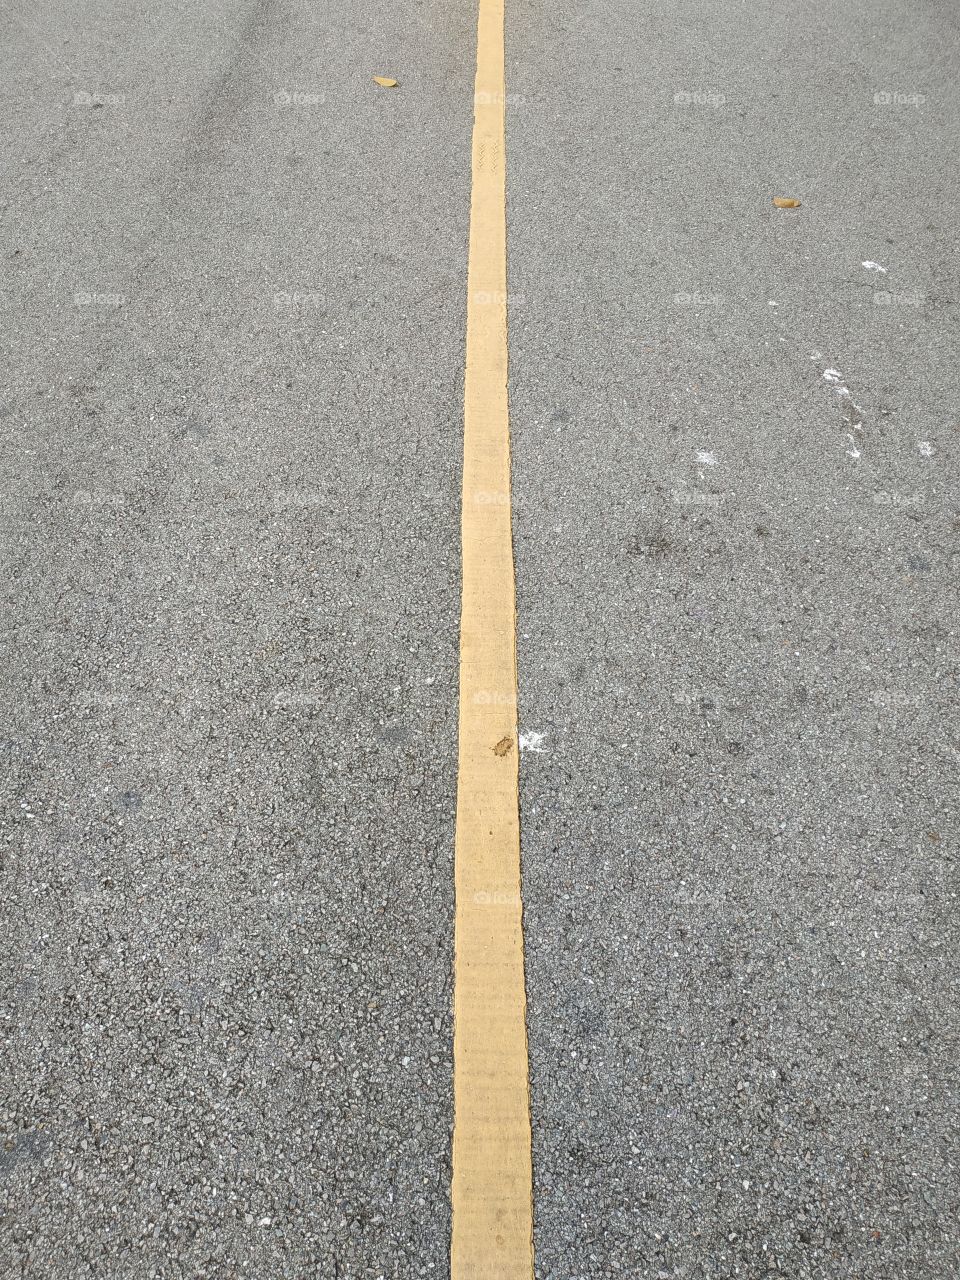 yellow line paint to separate lane on the dirty asphalt street.